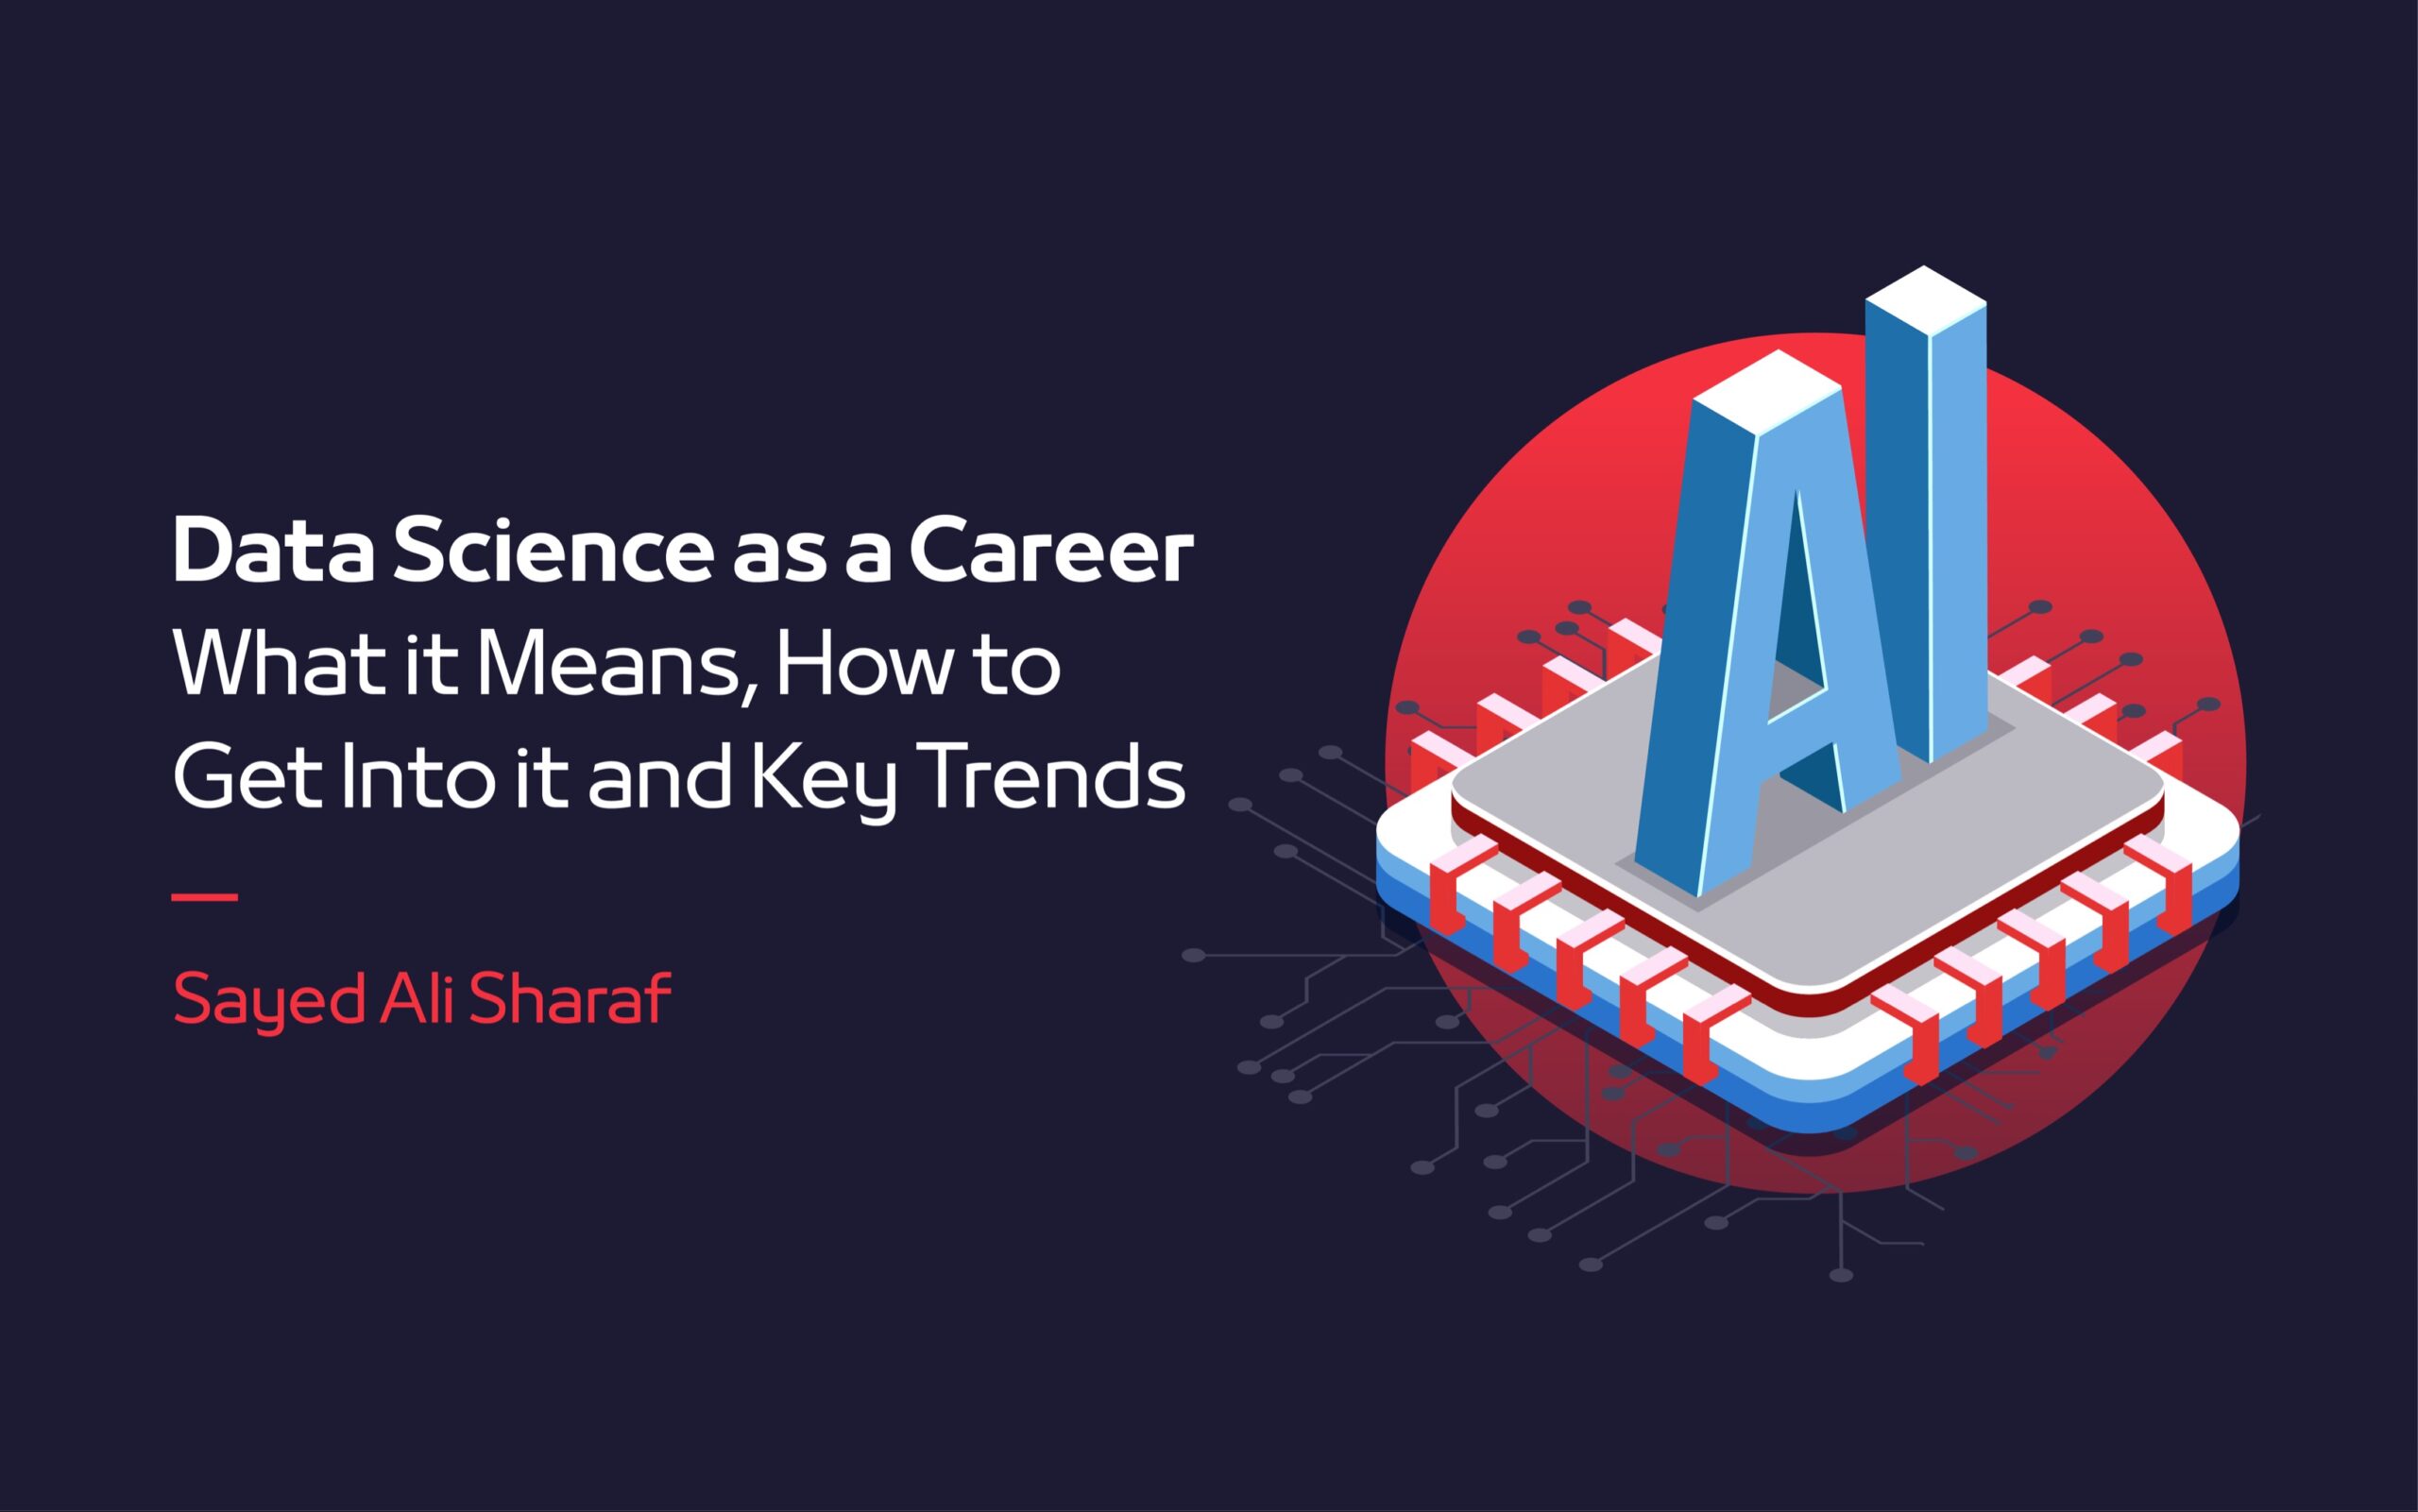 Data Science as a Career – What it Means, How to Get Into it and Key Trends